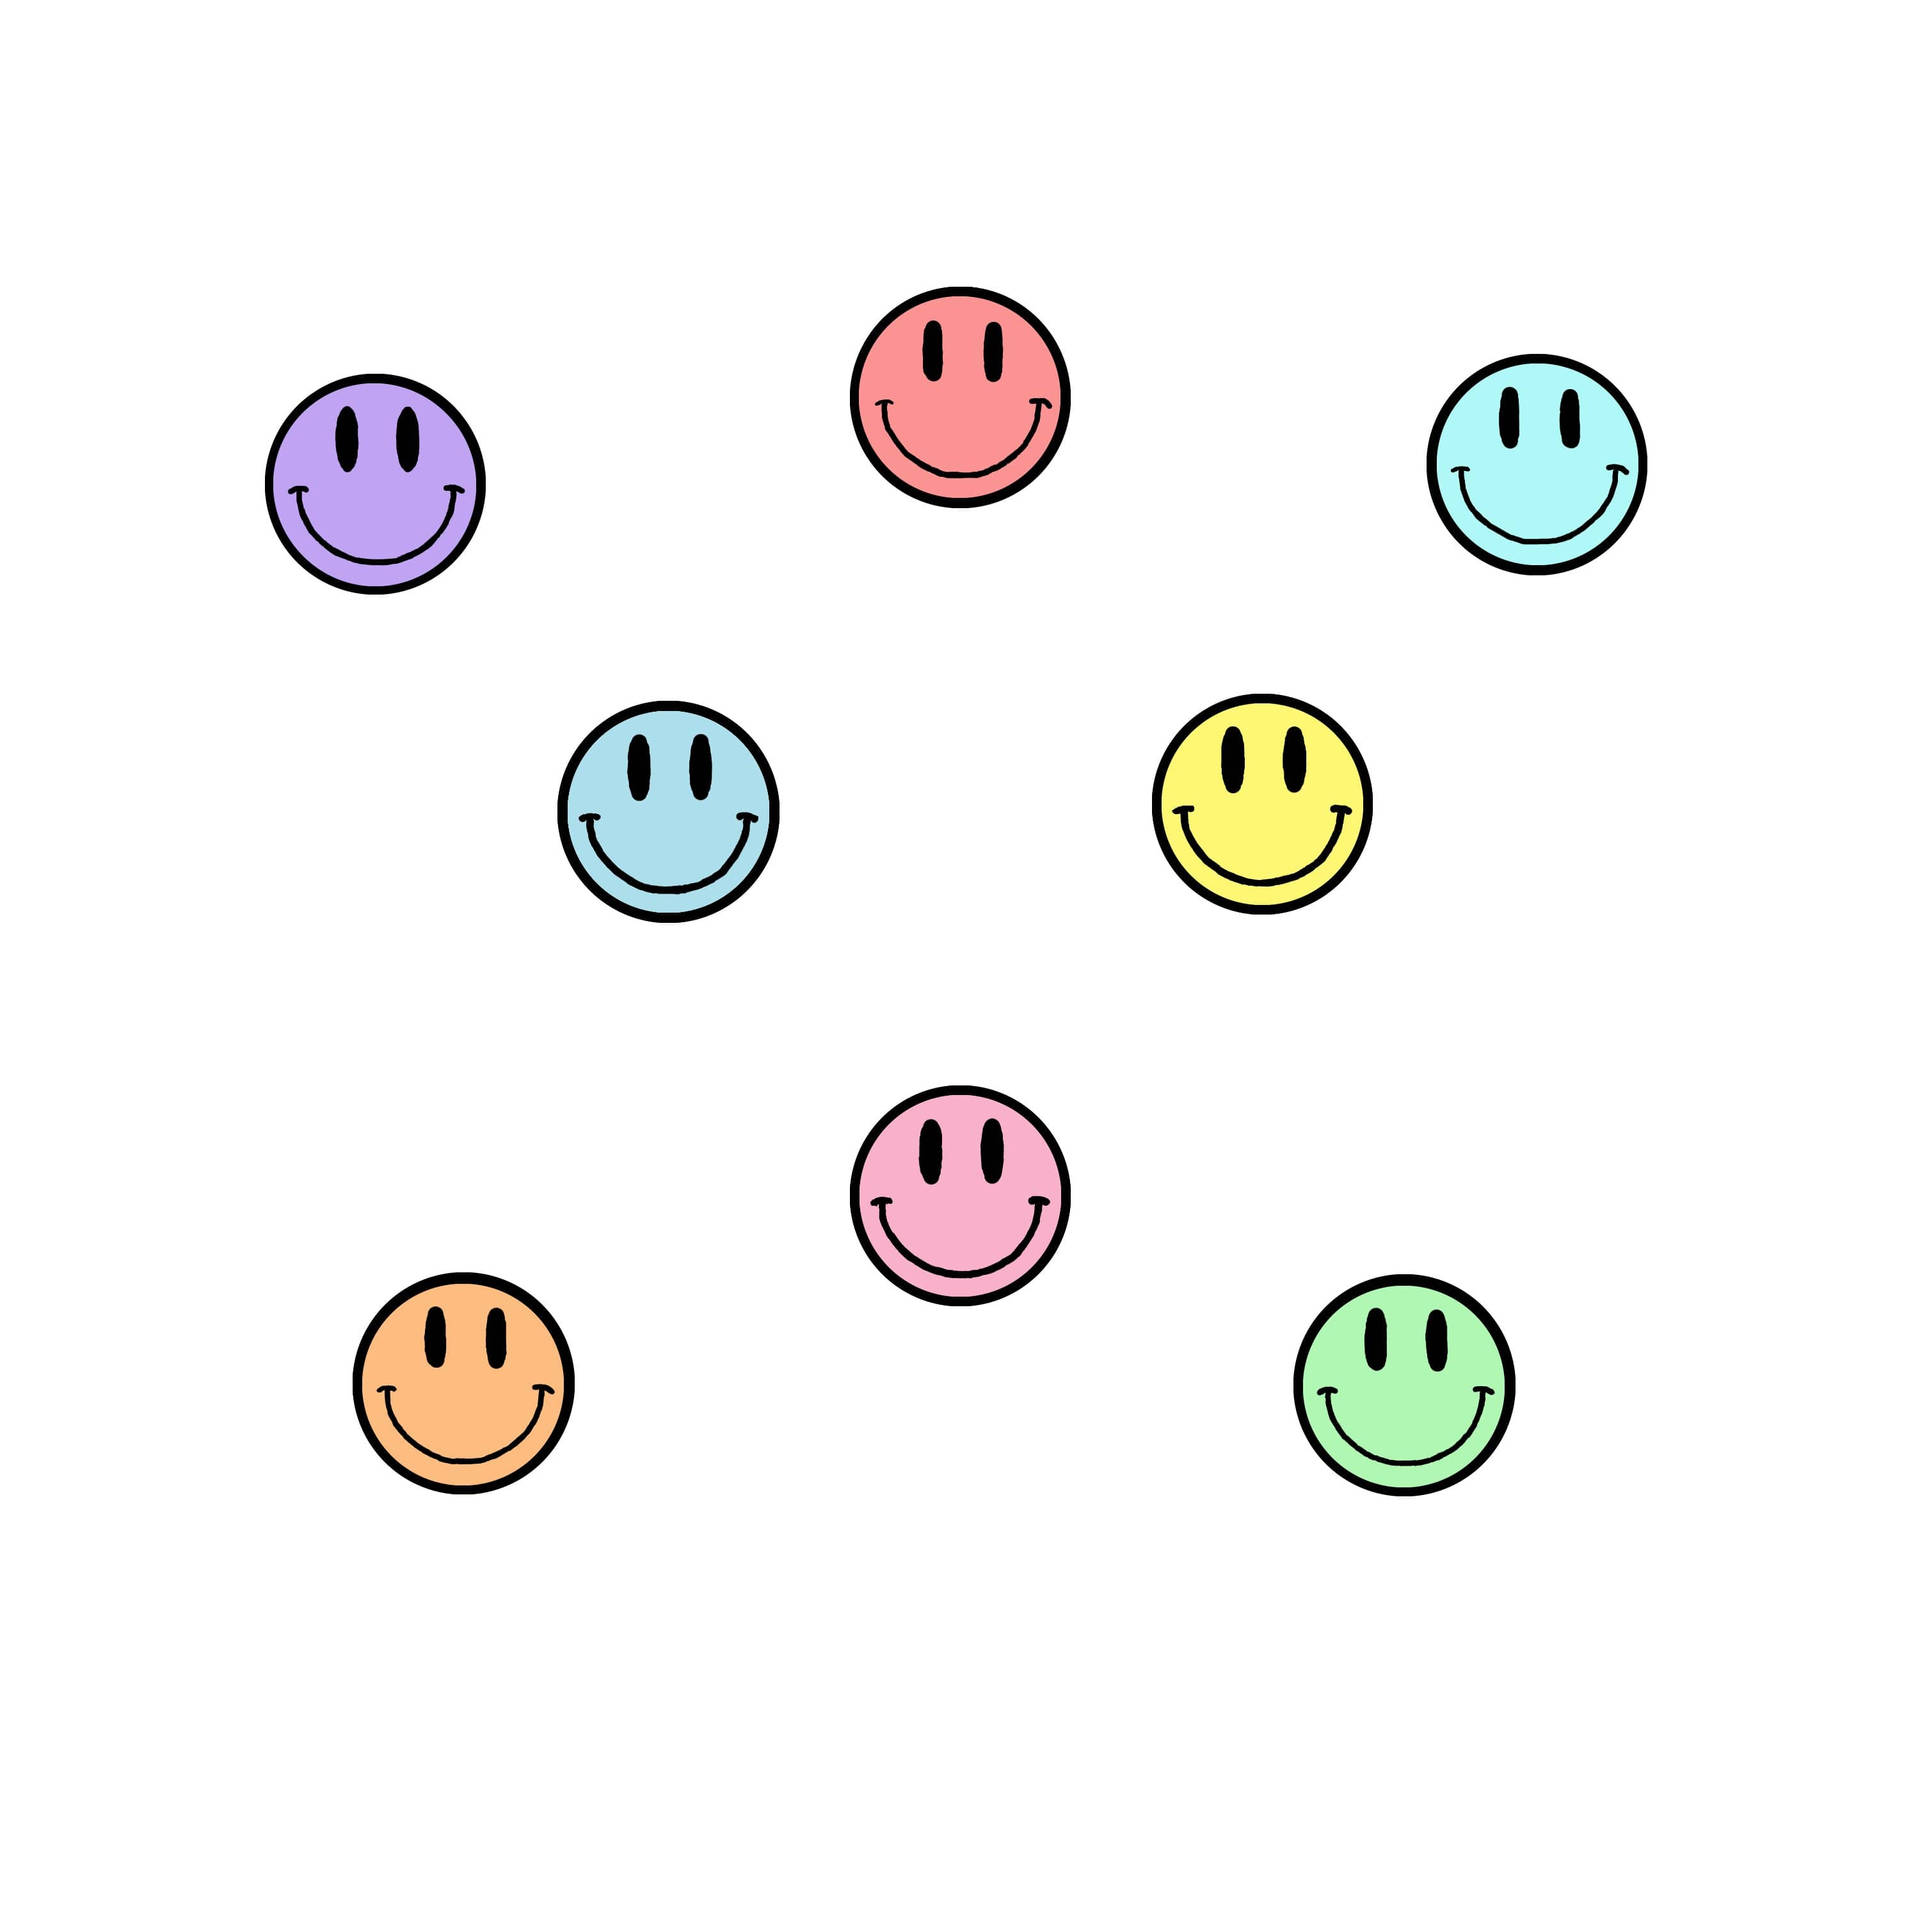 A Cheerful Preppy Smiley Face Background